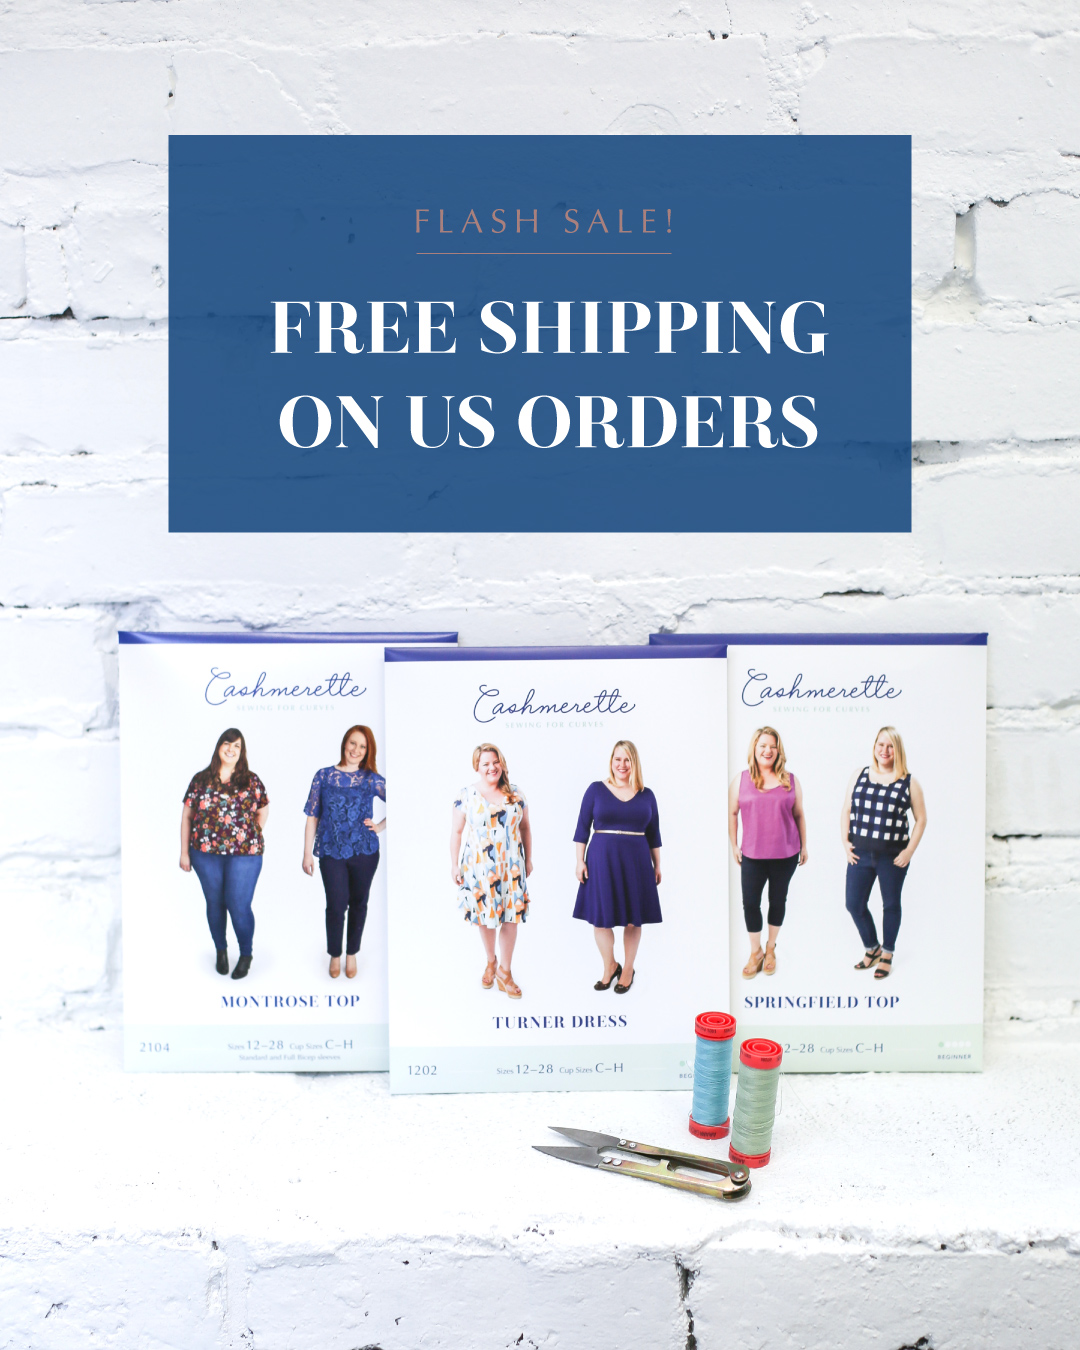 Flash sale! Free shipping on US orders